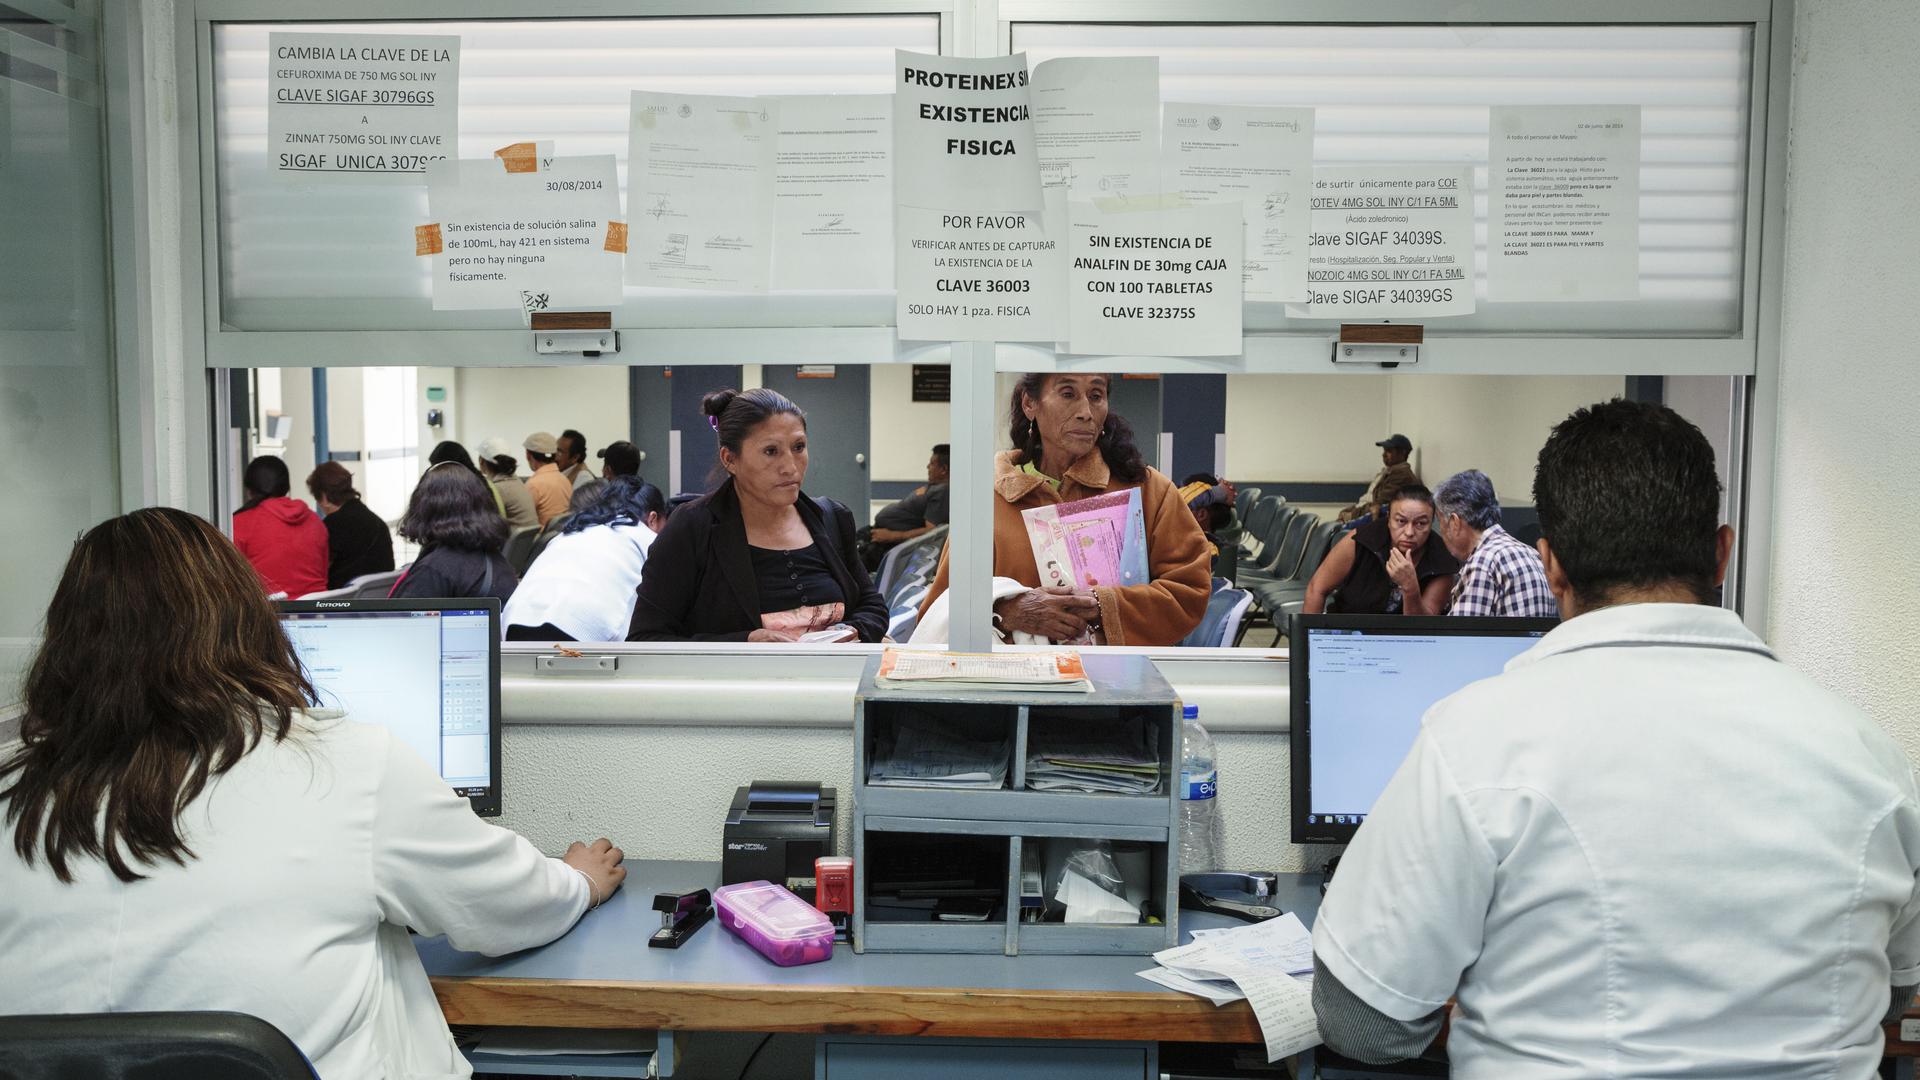 Doña Remedios and her daughter at the pharmacy of the National Cancer Institute in Mexico City, Mexico on September 1, 2014 to fill a prescription for morphine. They have to travel for several hours to procure the medication because there are no hospitals